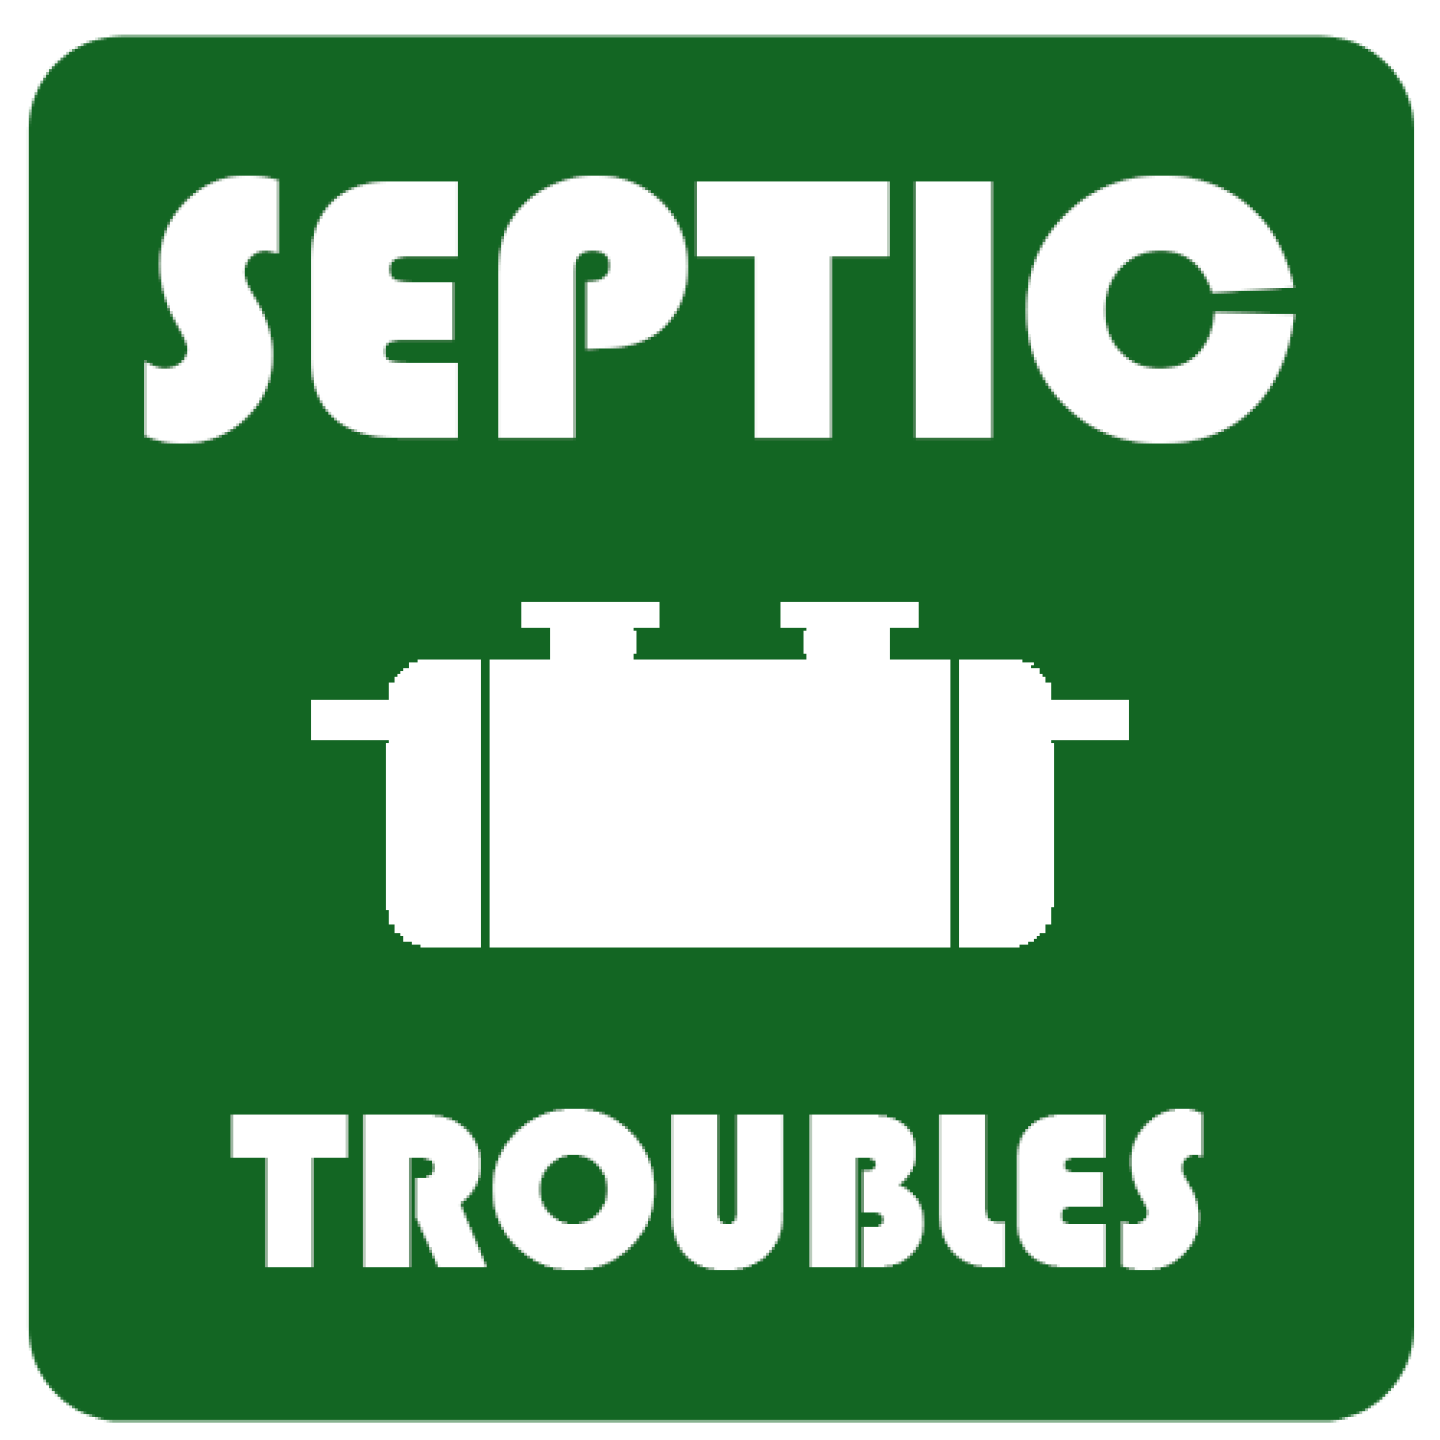 Septic_Troubles